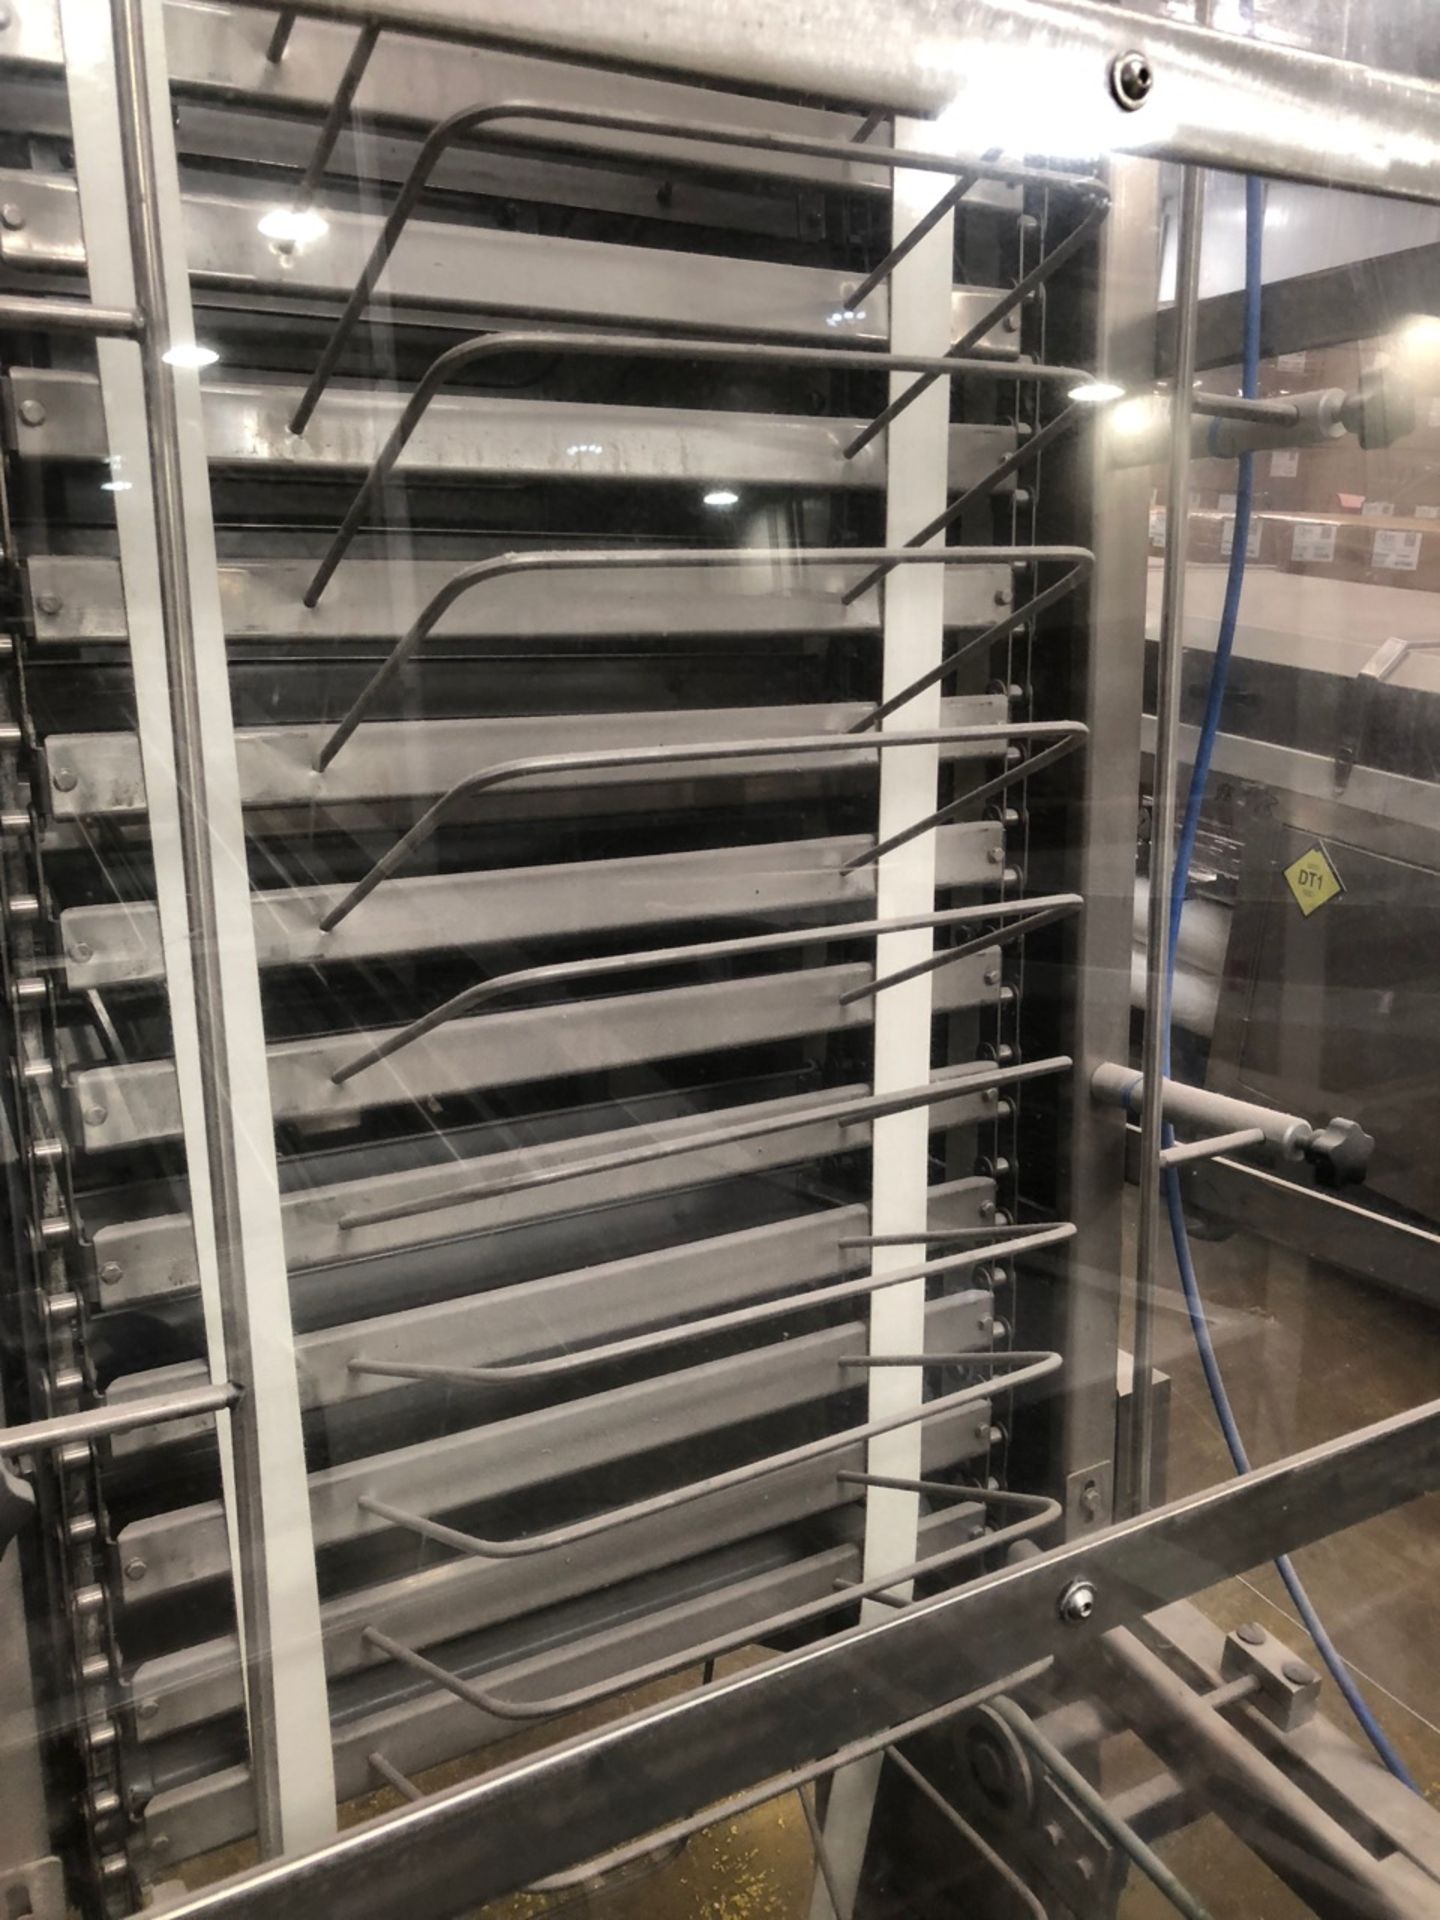 All food Arching cooling conveyor | All food Arching cooling conveyor. Part of bulk bid lot 255A. - Image 2 of 11